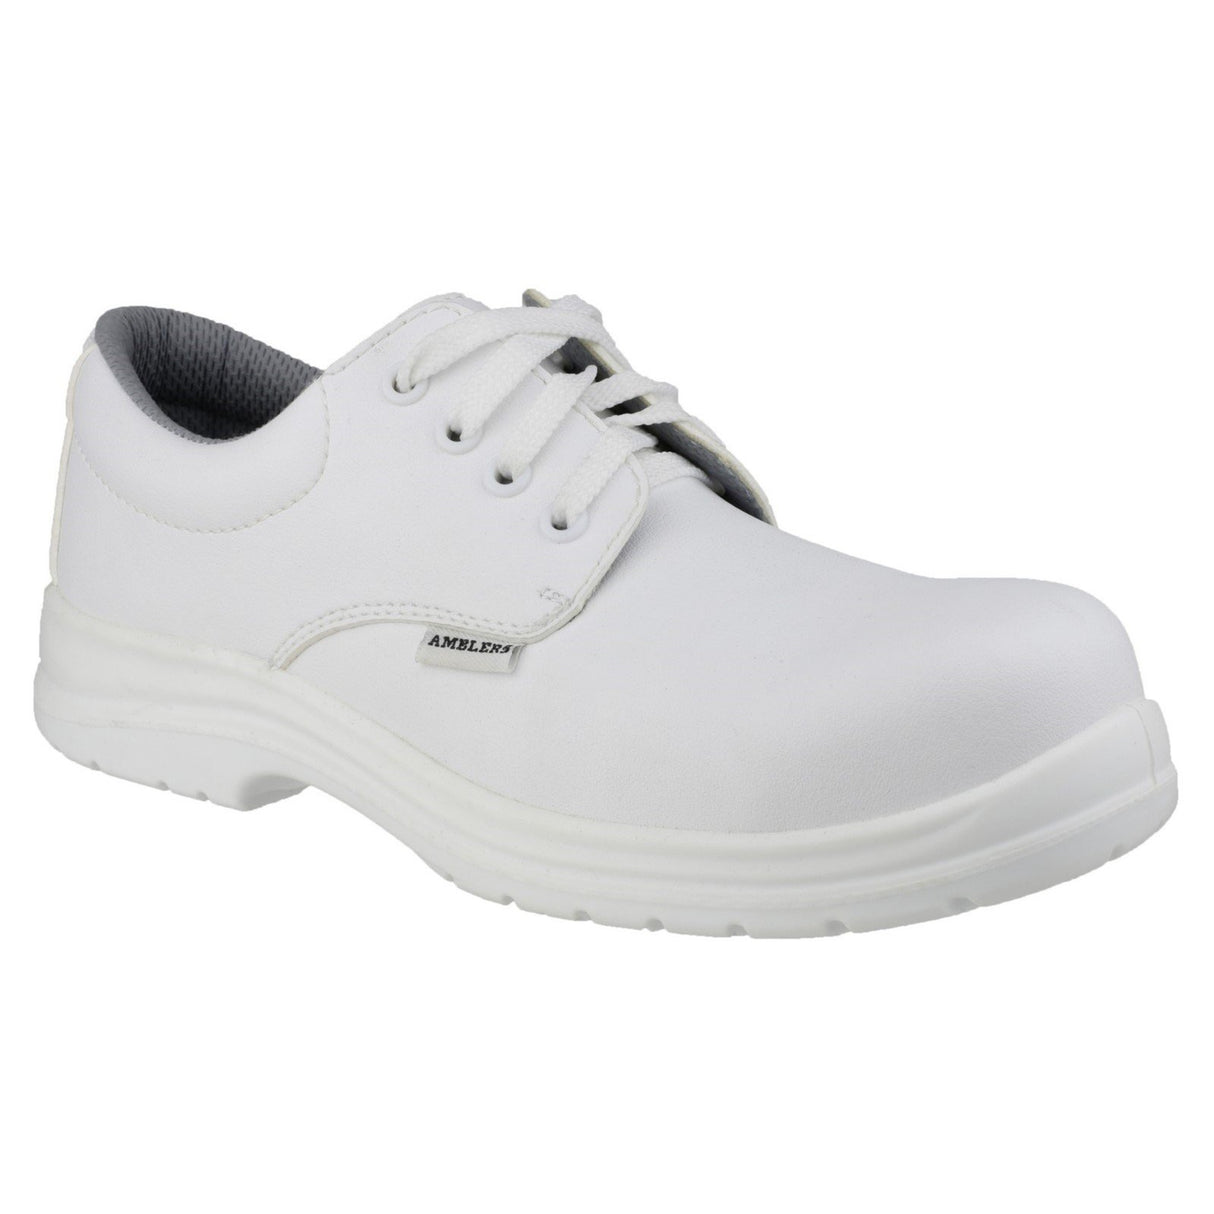 Amblers Safety Lace Up Safety Shoes